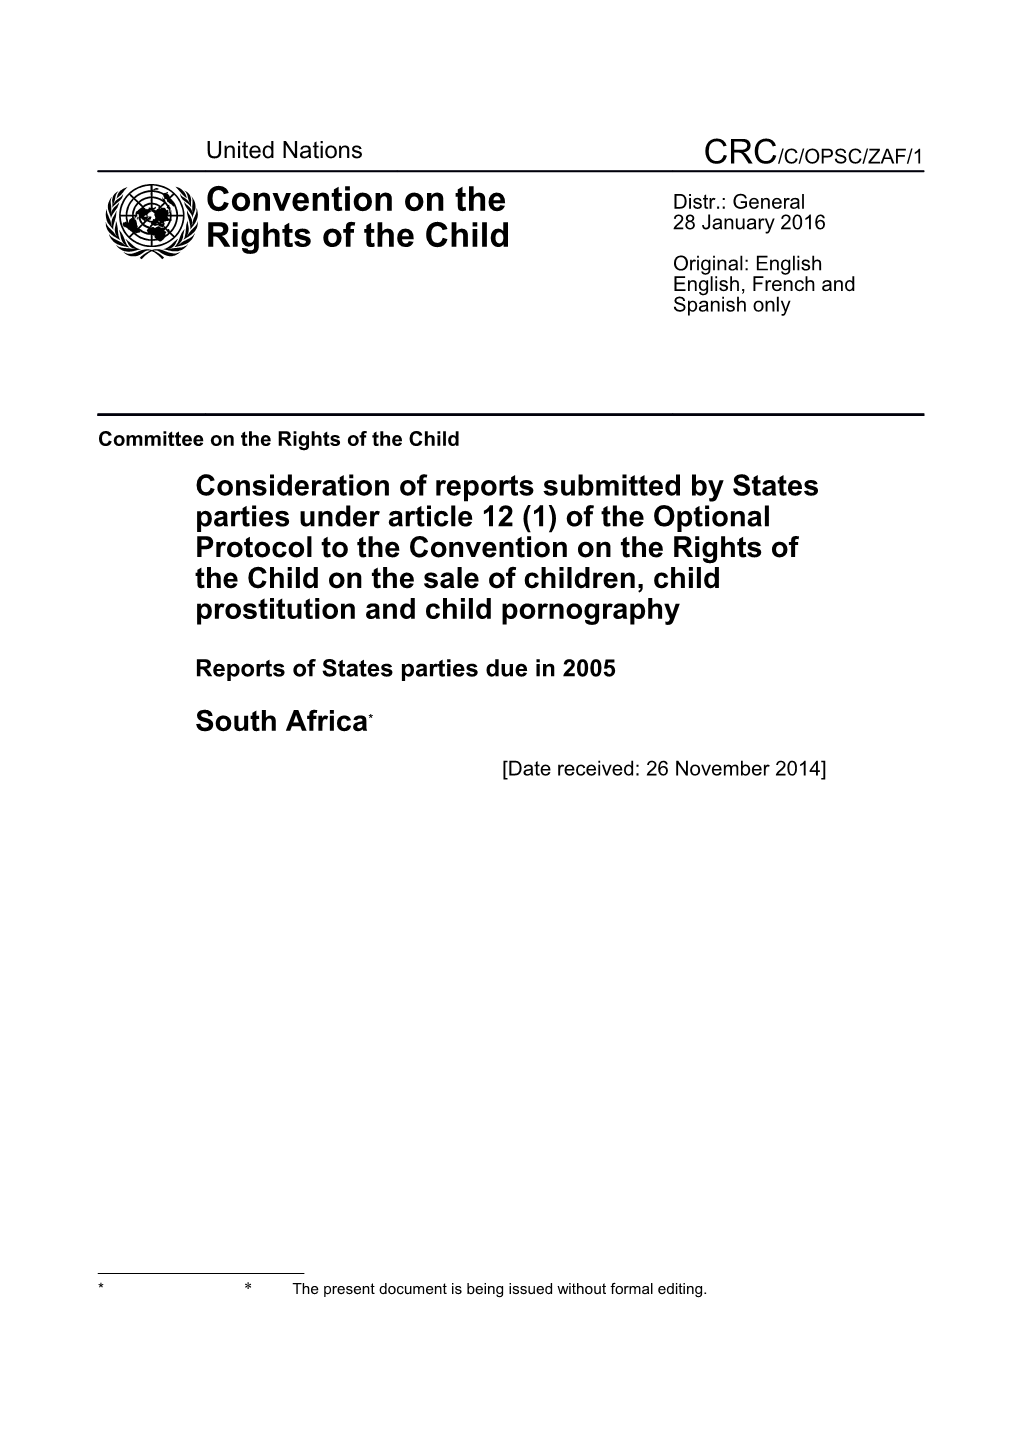 Committee on the Rights of the Child s11